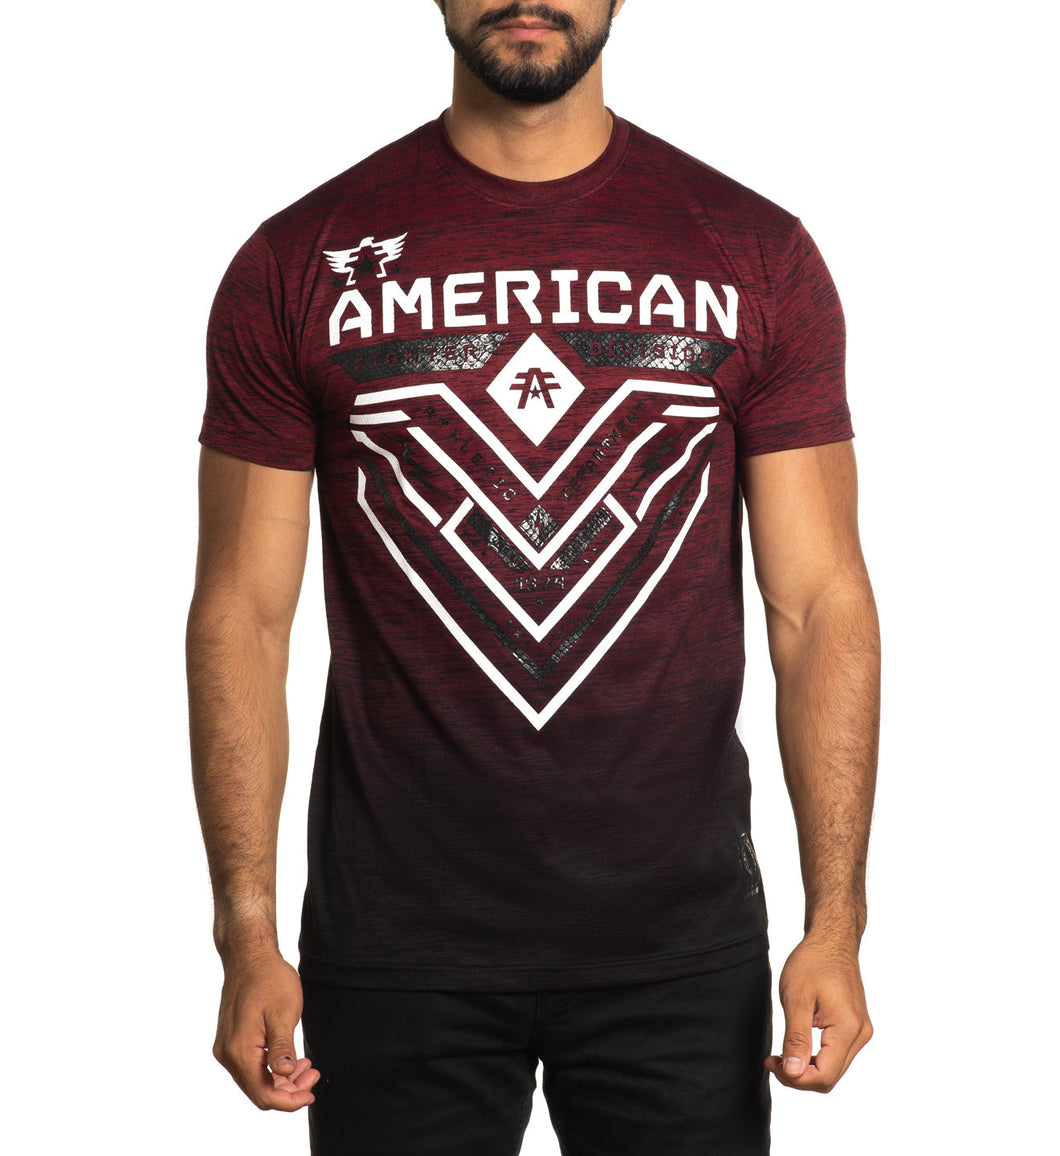 American Fighter Crystal River Mens Tee Shirt FM14403